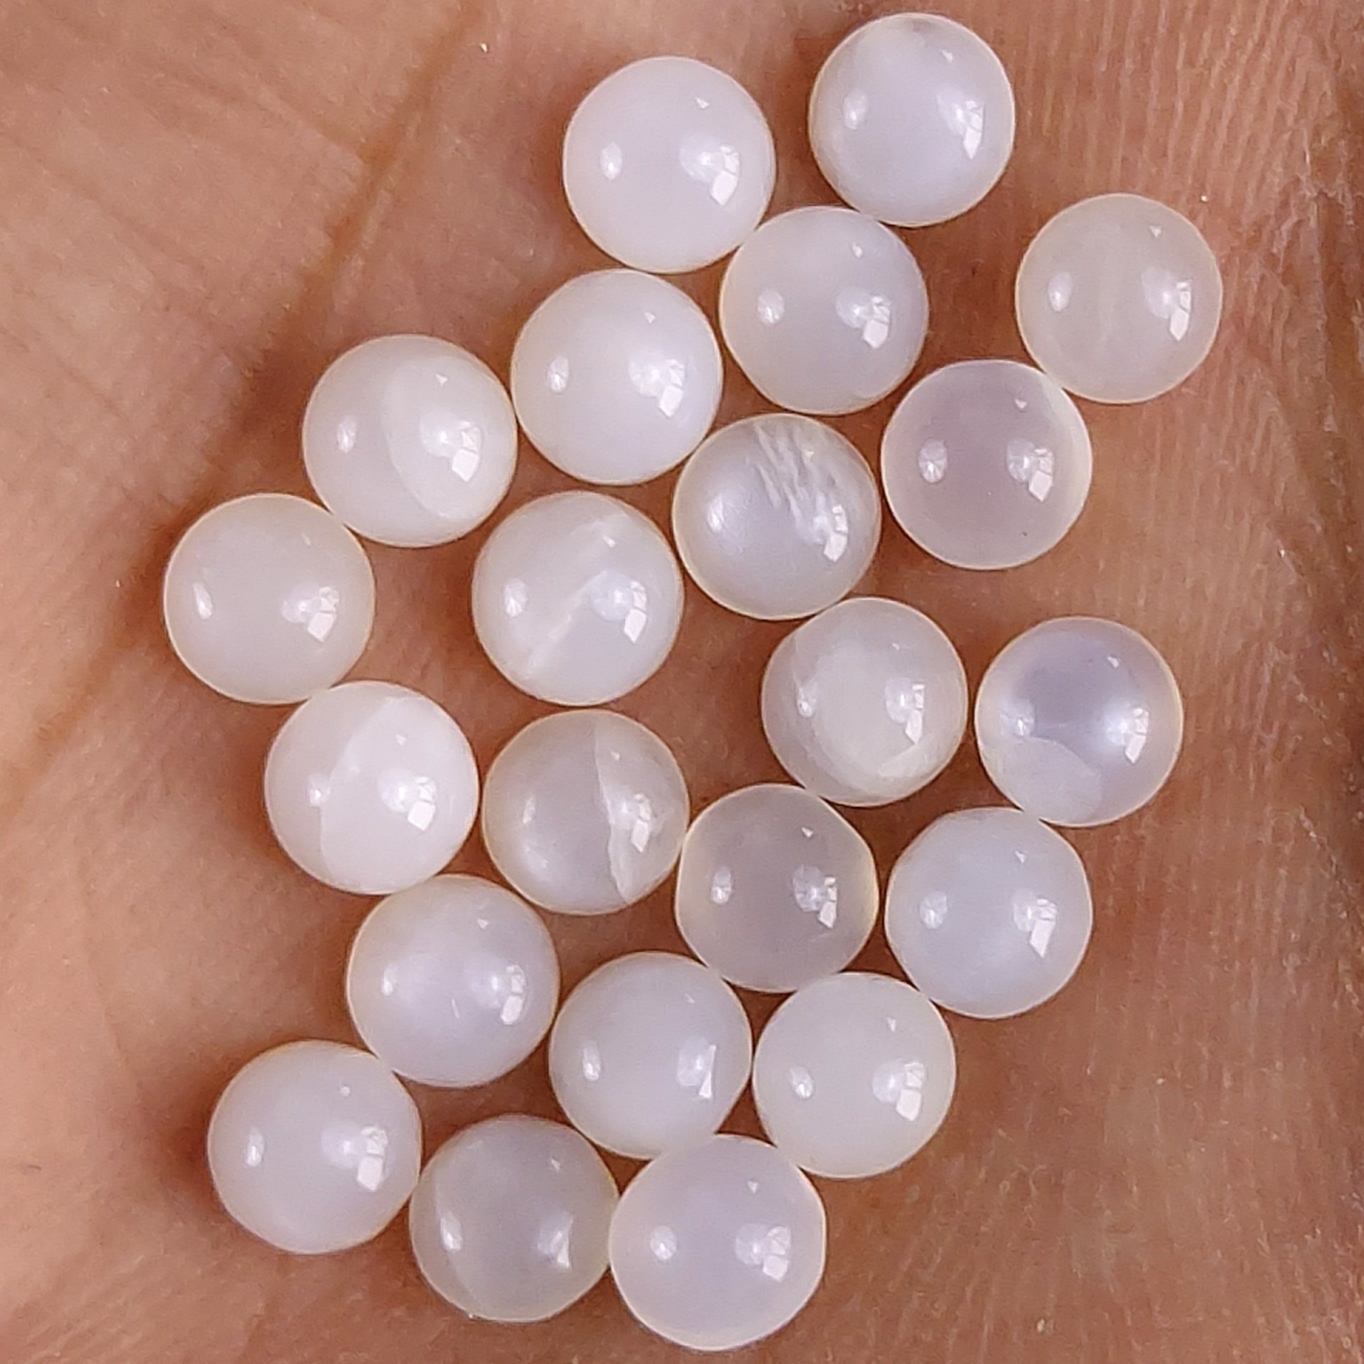 22Pcs 15Cts Natural White Moonstone Loose Cabochon Round Shape Gemstone For Jewelry Making Lot 5x5mm#647